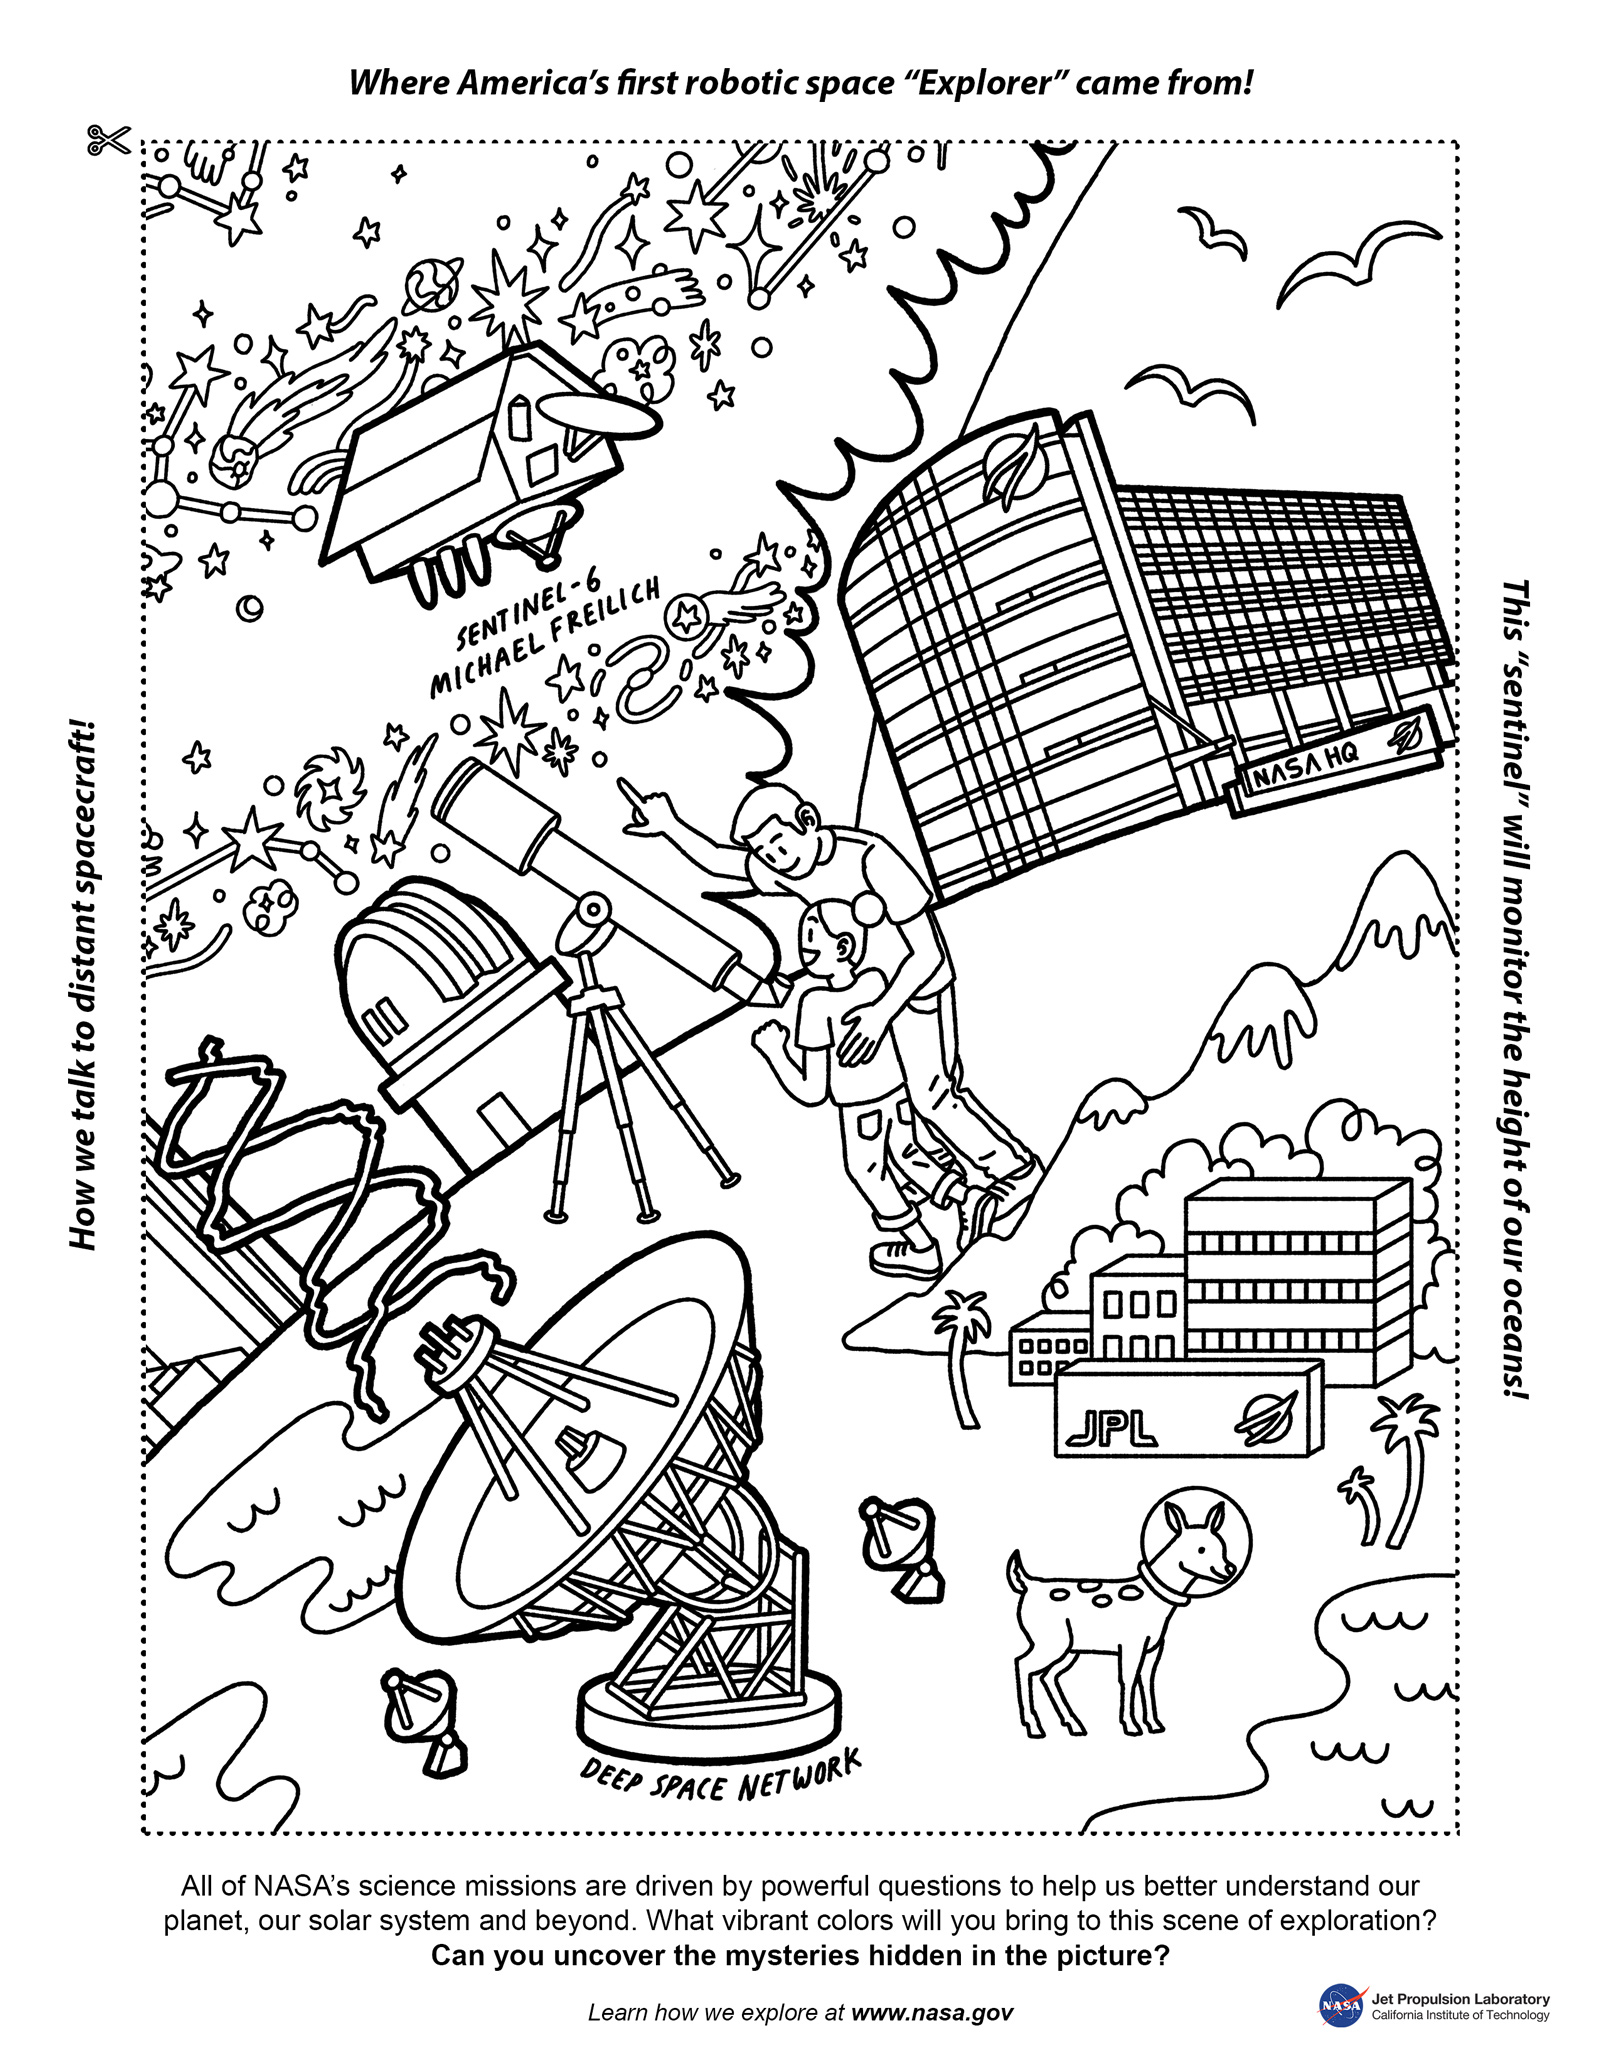 coloring page featuring the Sentinel-6 Michael Freilich spacecraft, NASA HQ, people looking through a telescope, a Deep Space Network antenna, and the JPL campus